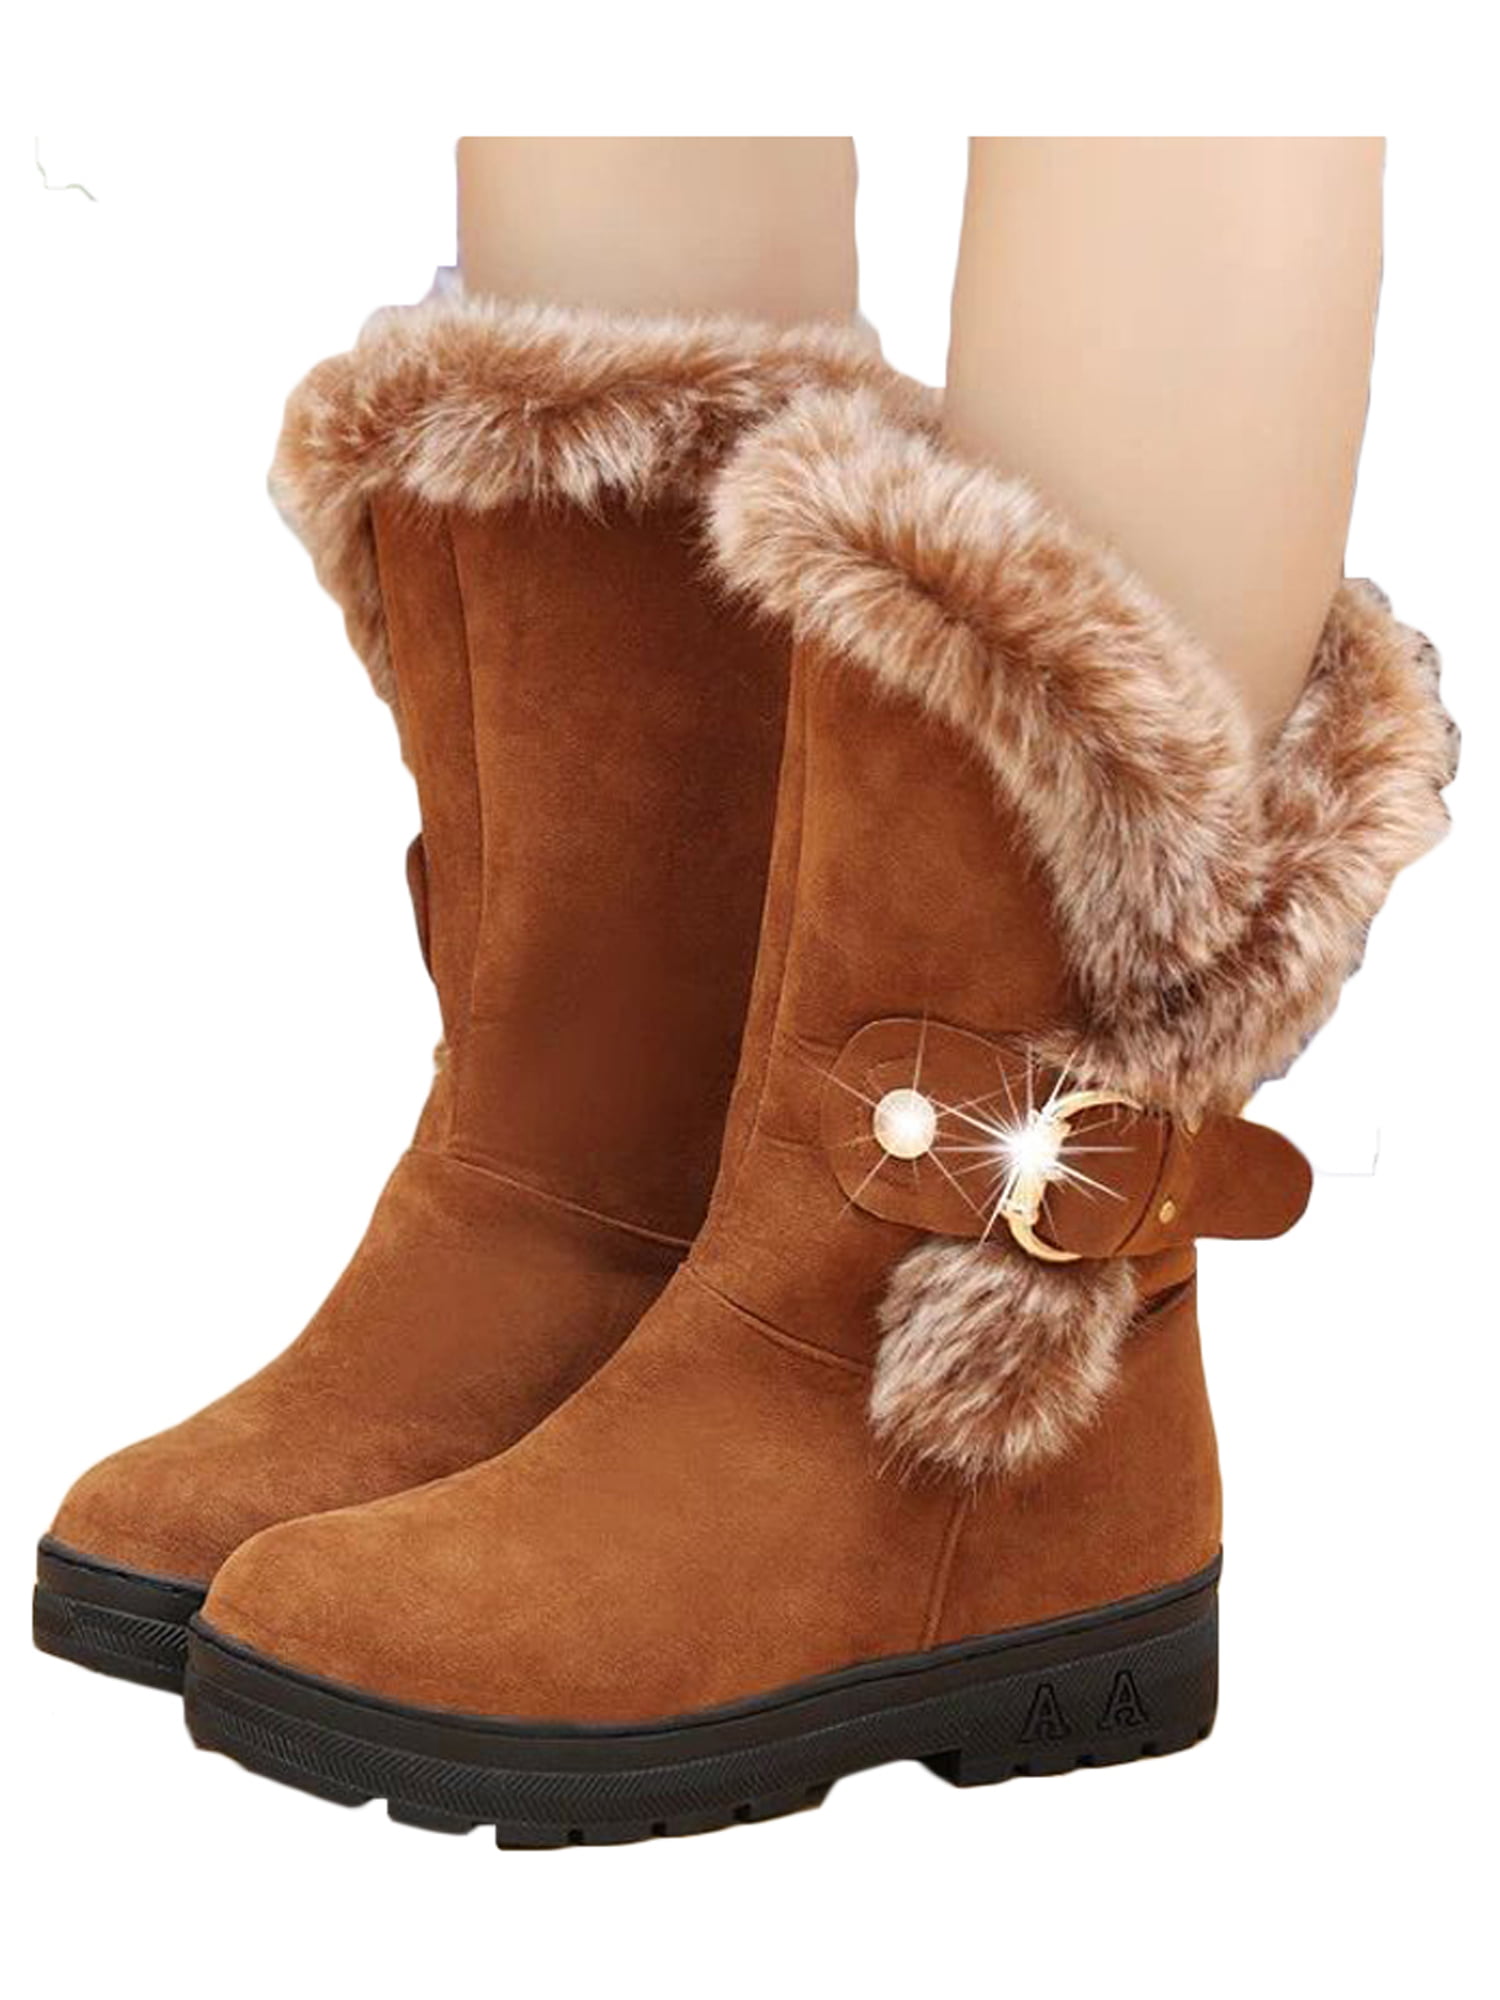 Womens Chunky Low-Heel Buckle Mid Calf Boots Winter Faux Fur Warm Casual Shoes 